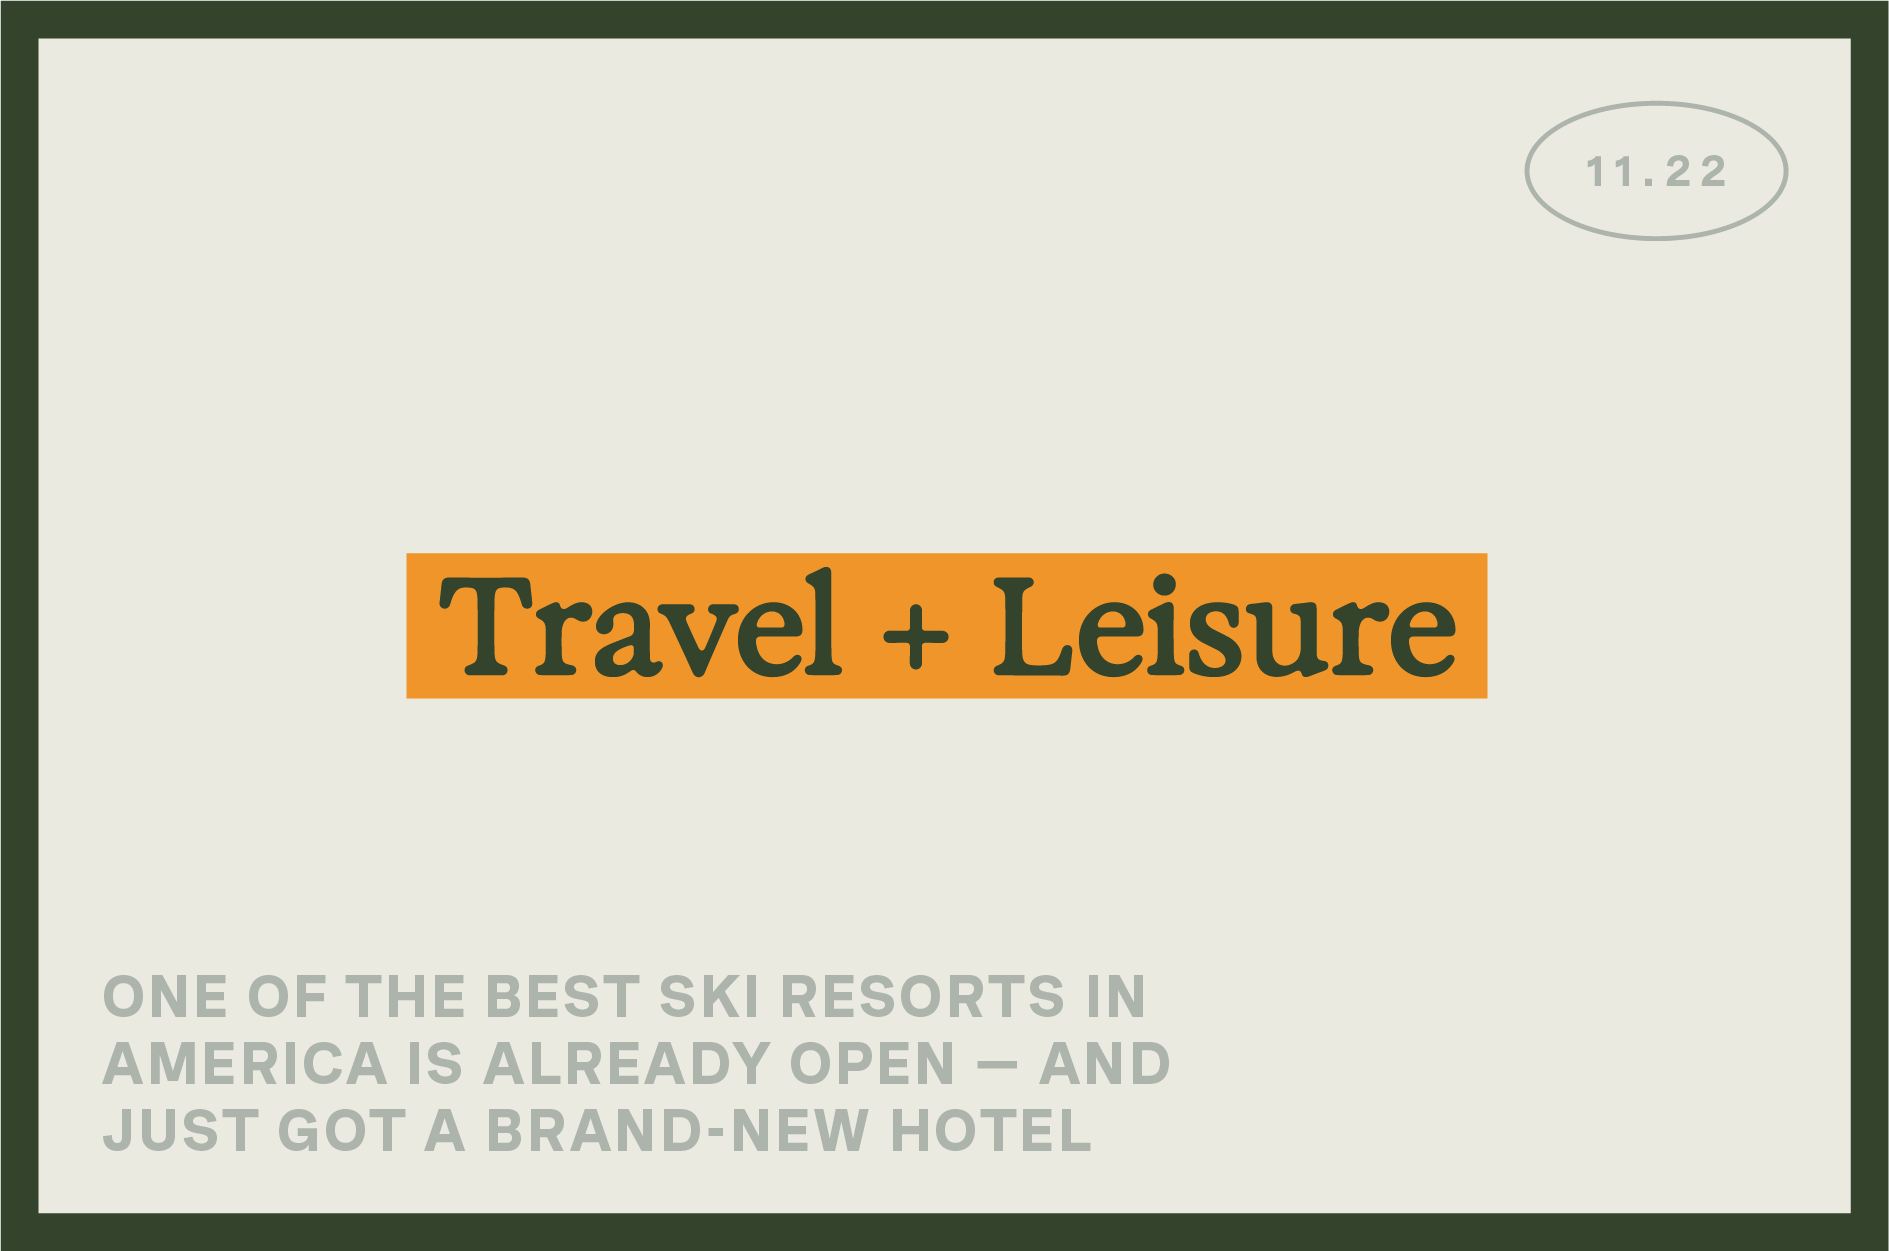 "Travel + Leisure" banner displays "One of the best SKI Resorts in America is already open and just got a brand-new hotel."